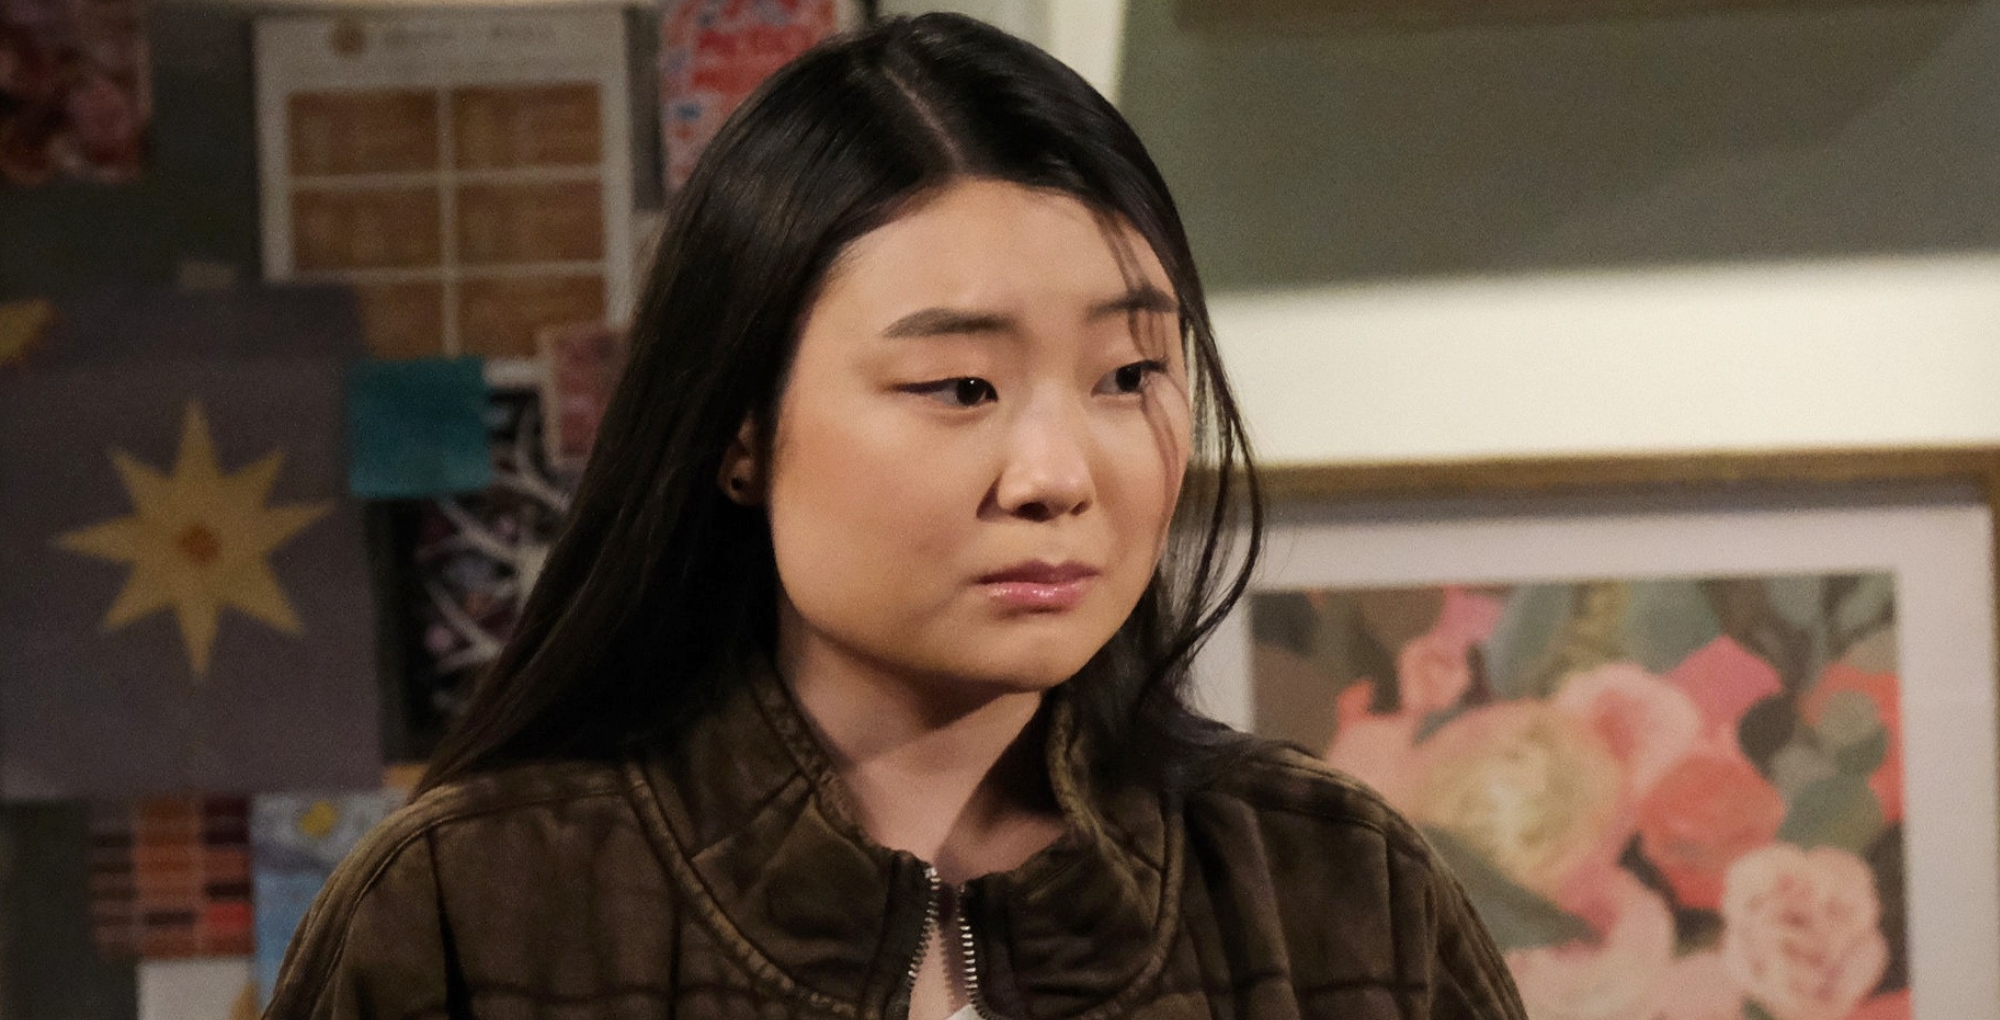 days of our lives spoilers have wendy shin eyeing something of a surprise